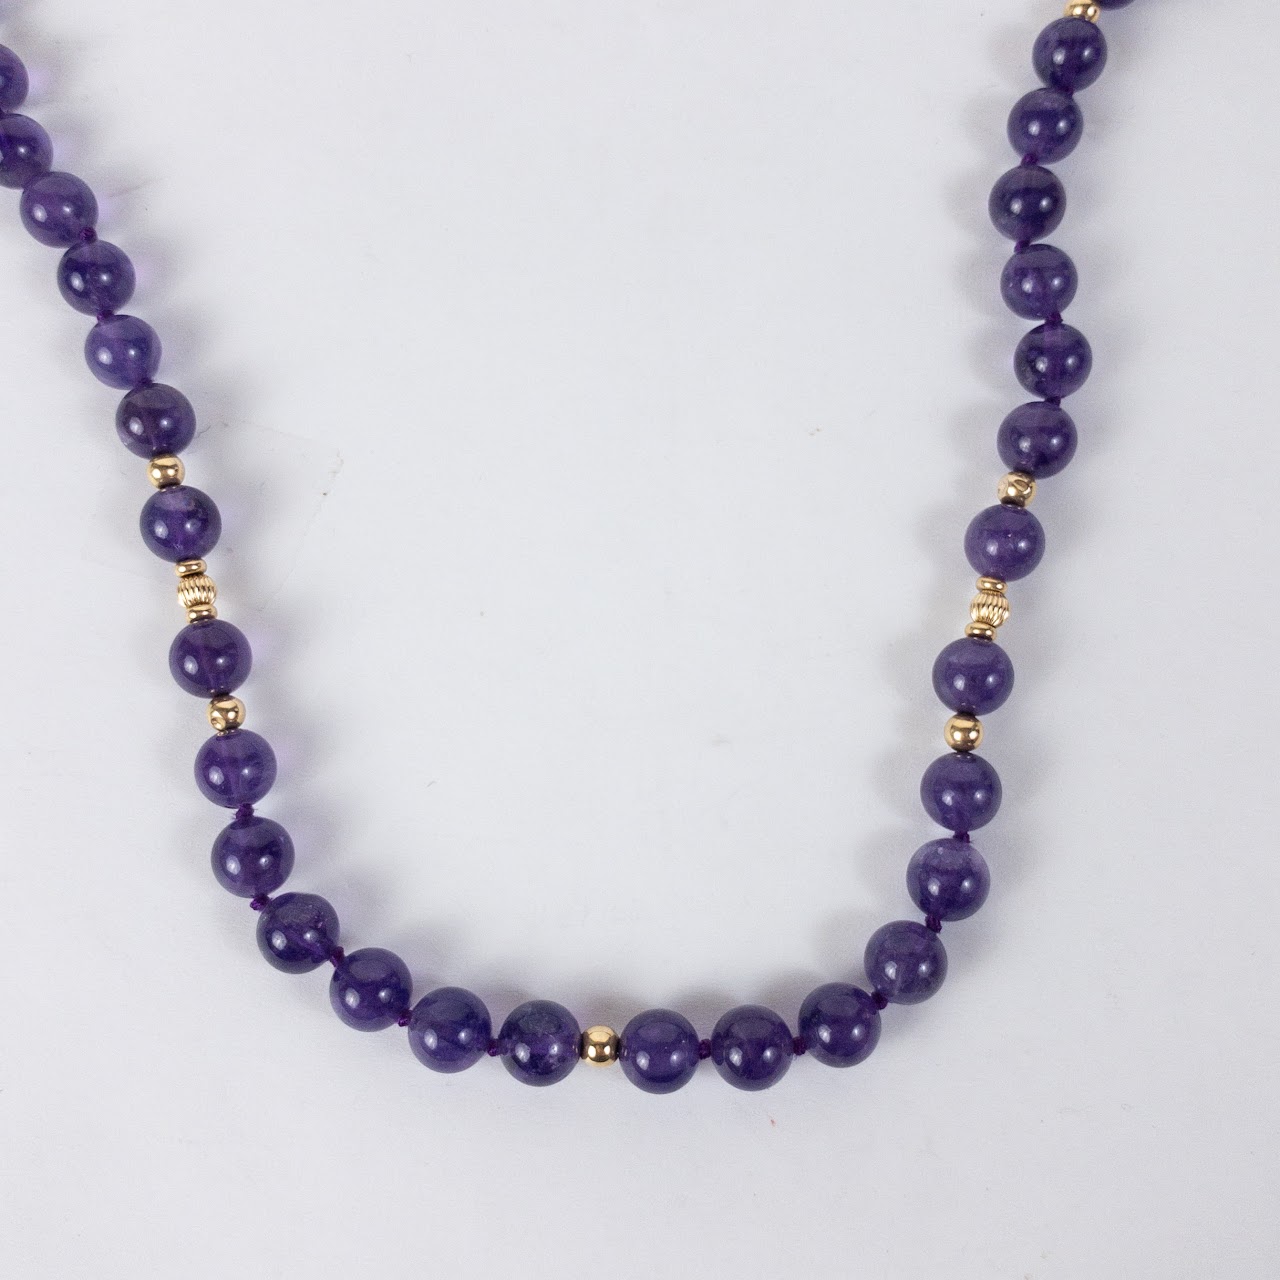 Amethyst and 14K Gold Bead Necklace